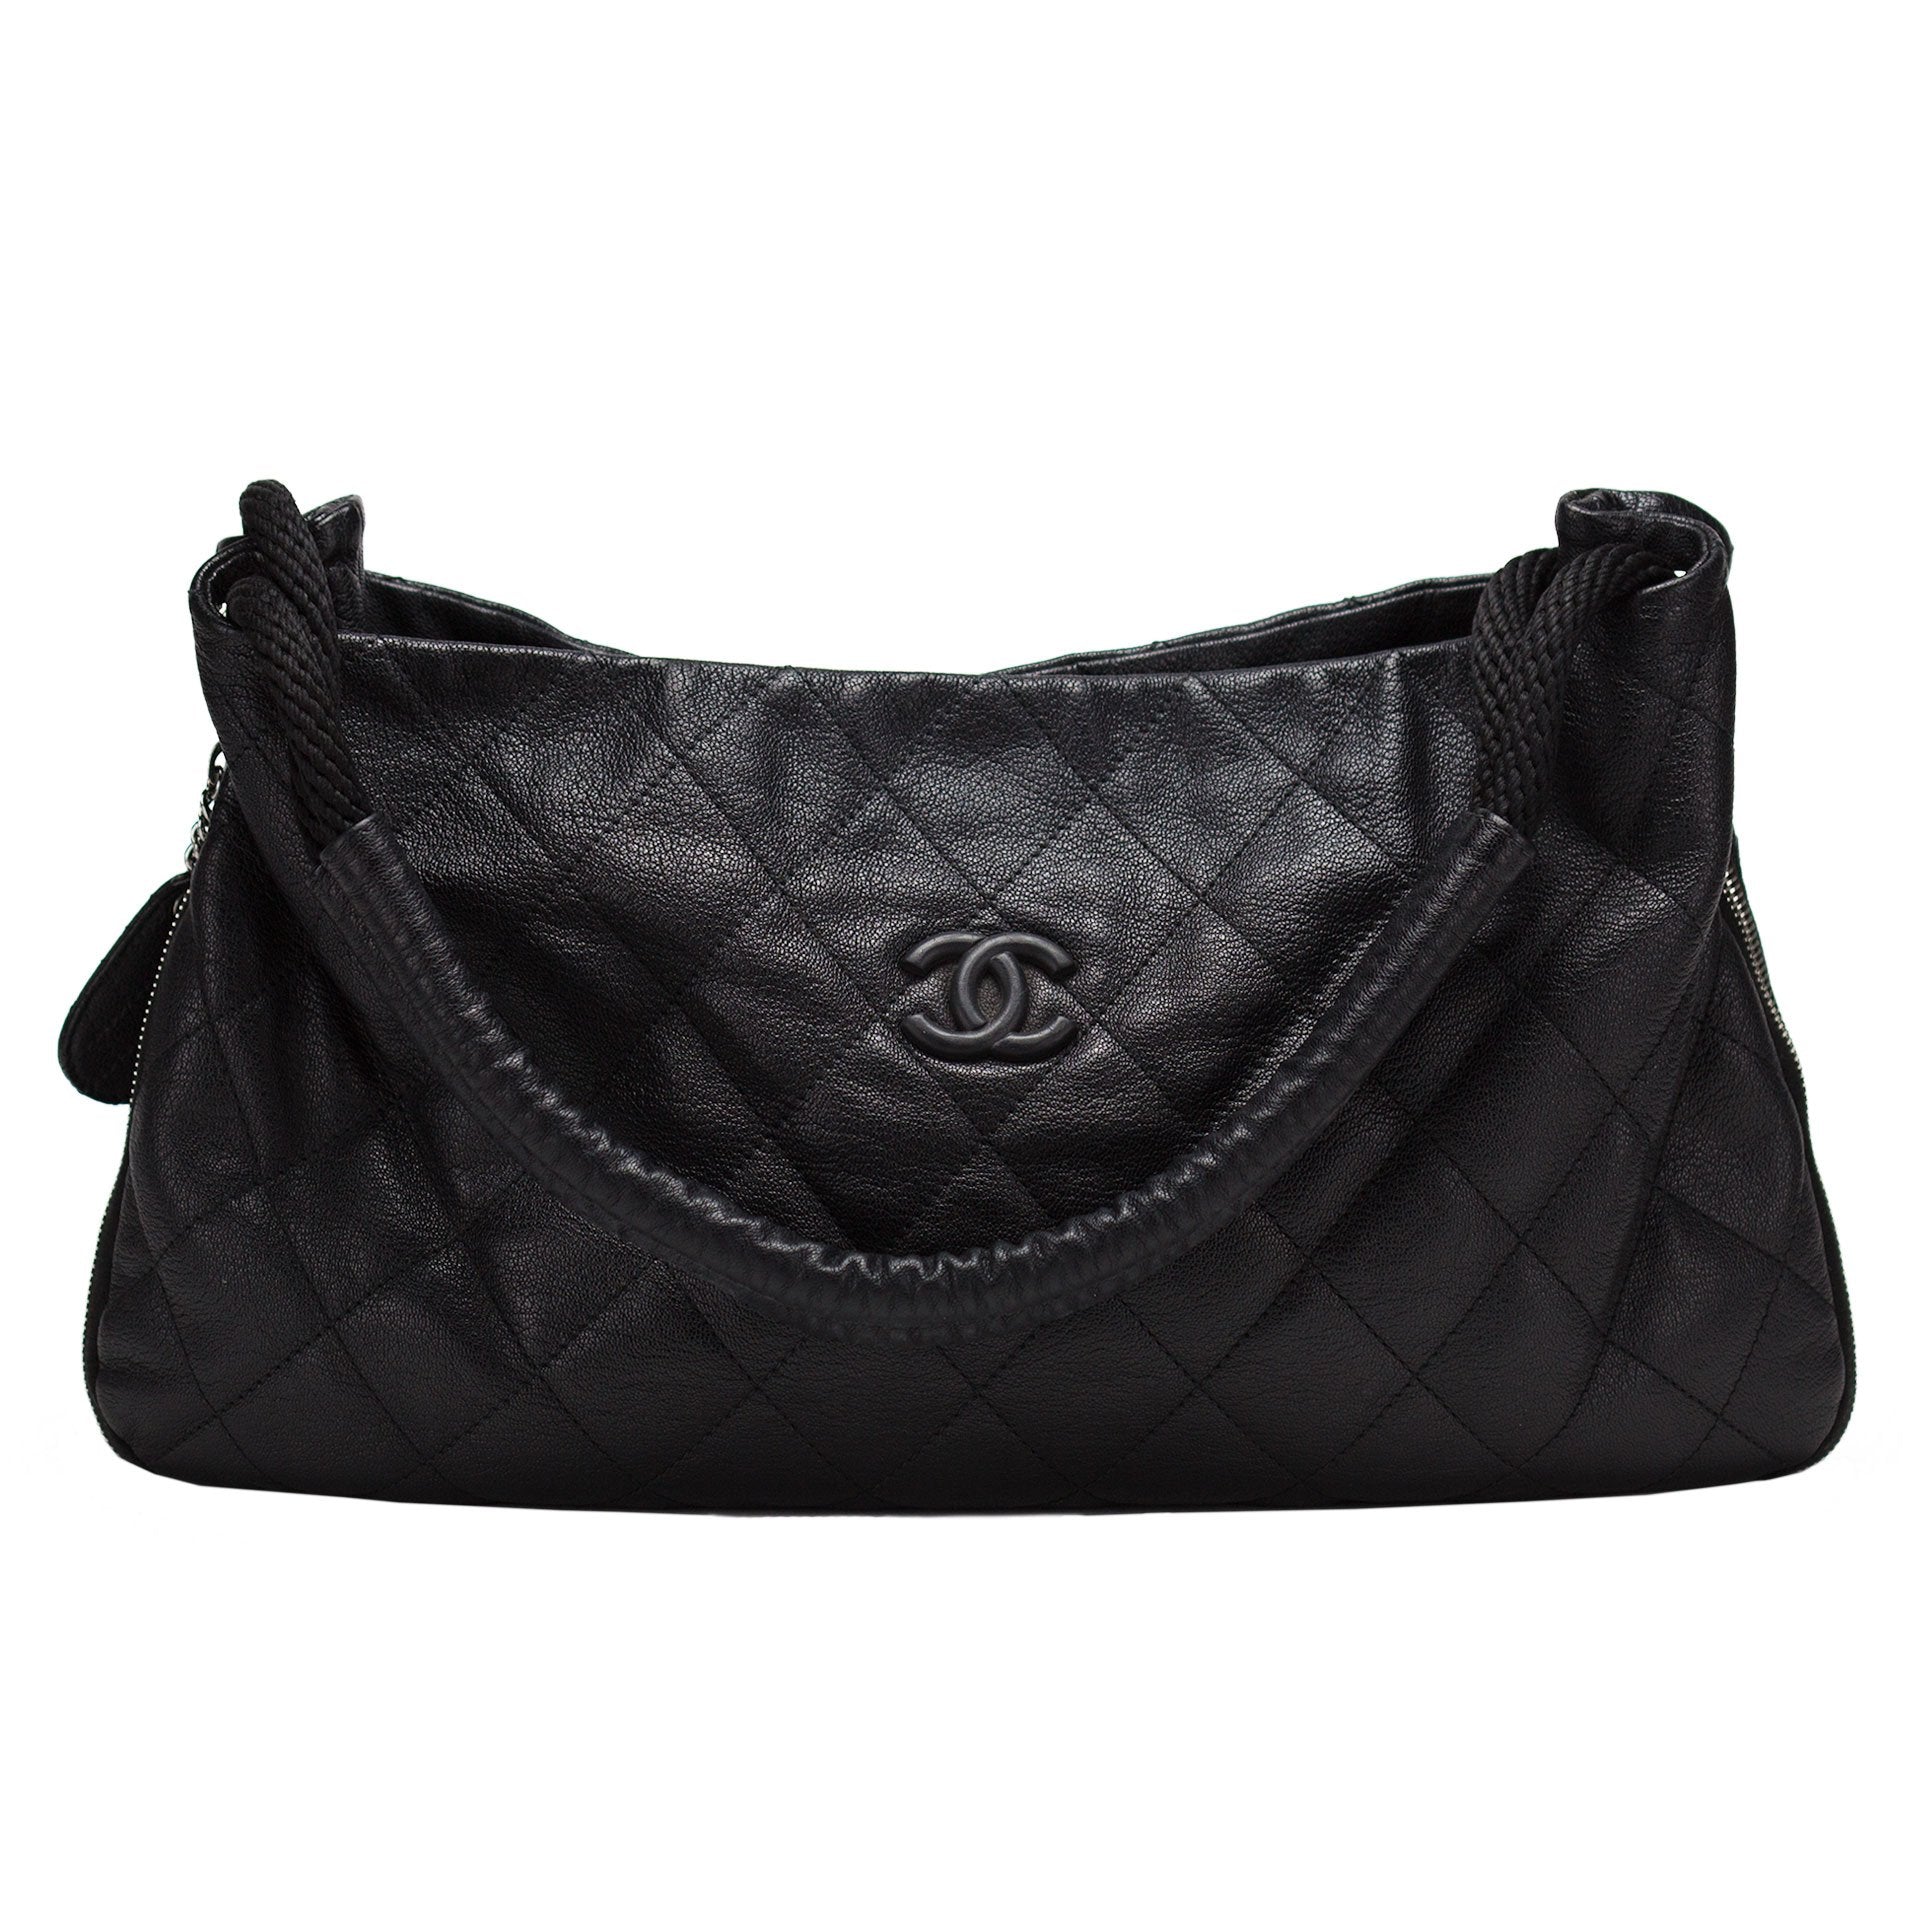 Chanel Paris CC 2005 Black Calfskin Quilted Leather Expandable PNY Max